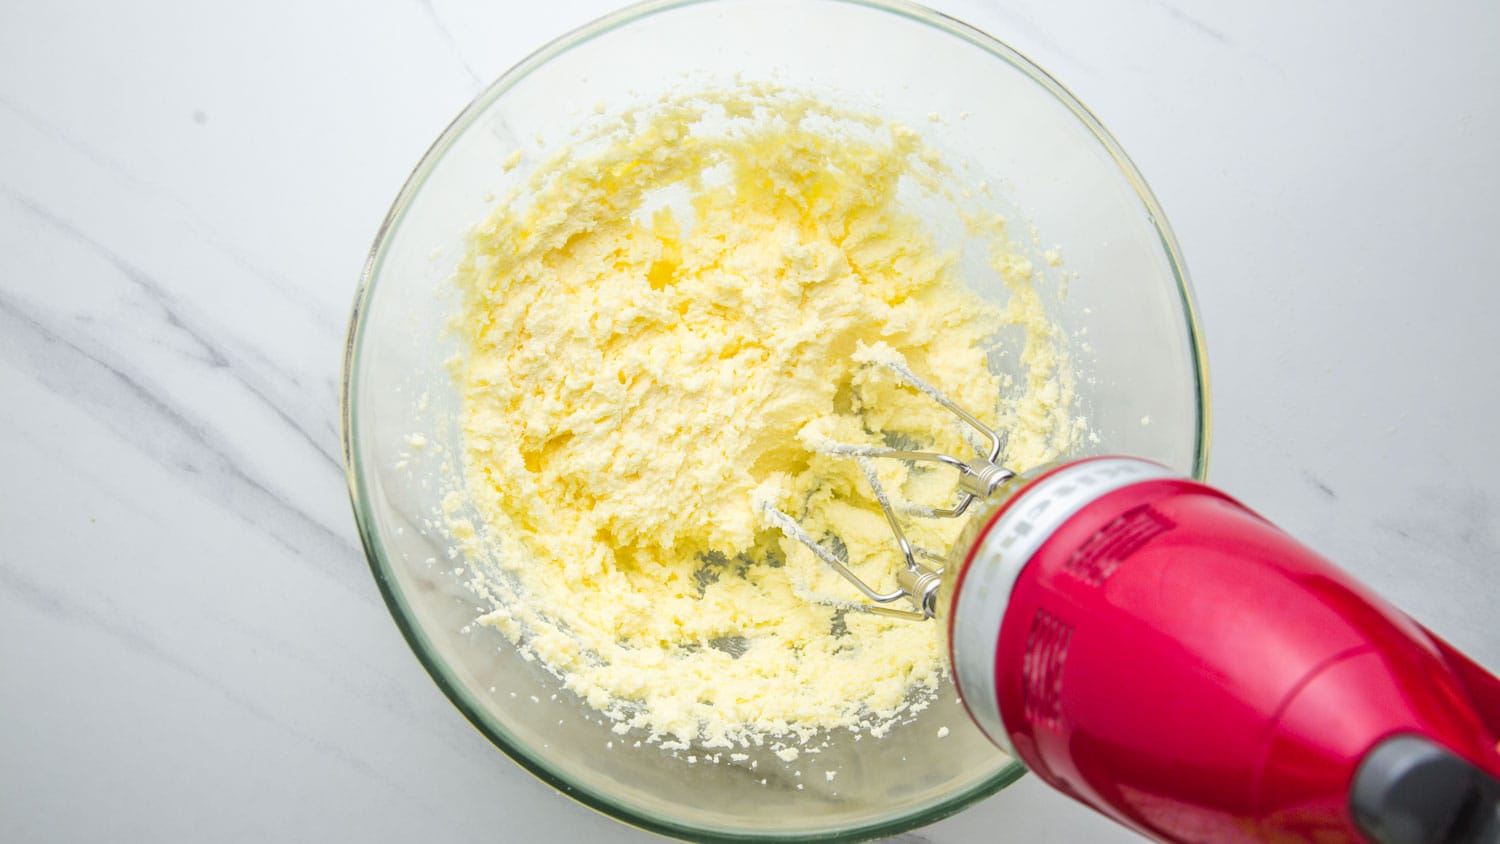 Creamed butter and sugar in a glass bowl, and a red kitchenaid hand mixer.